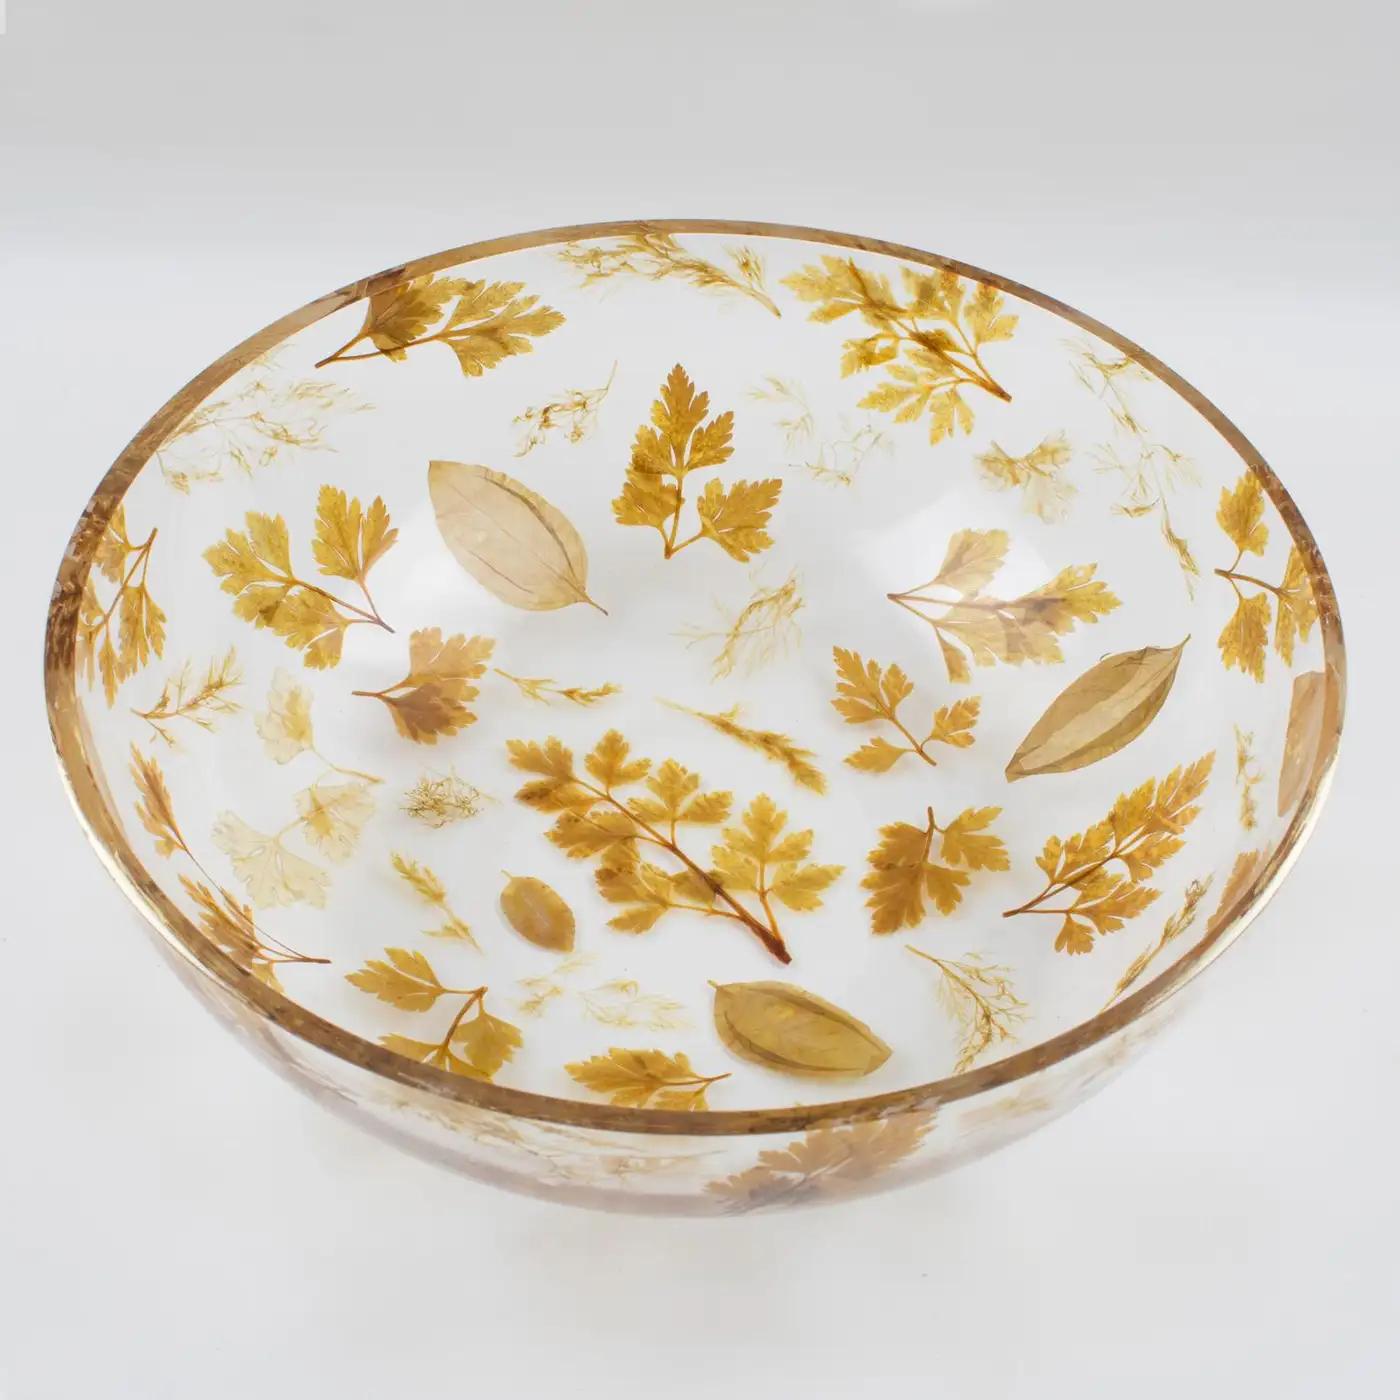 Mid-Century Modern Resin Centerpiece Serving Bowl with Leaves Inclusions, Italy 1970s For Sale